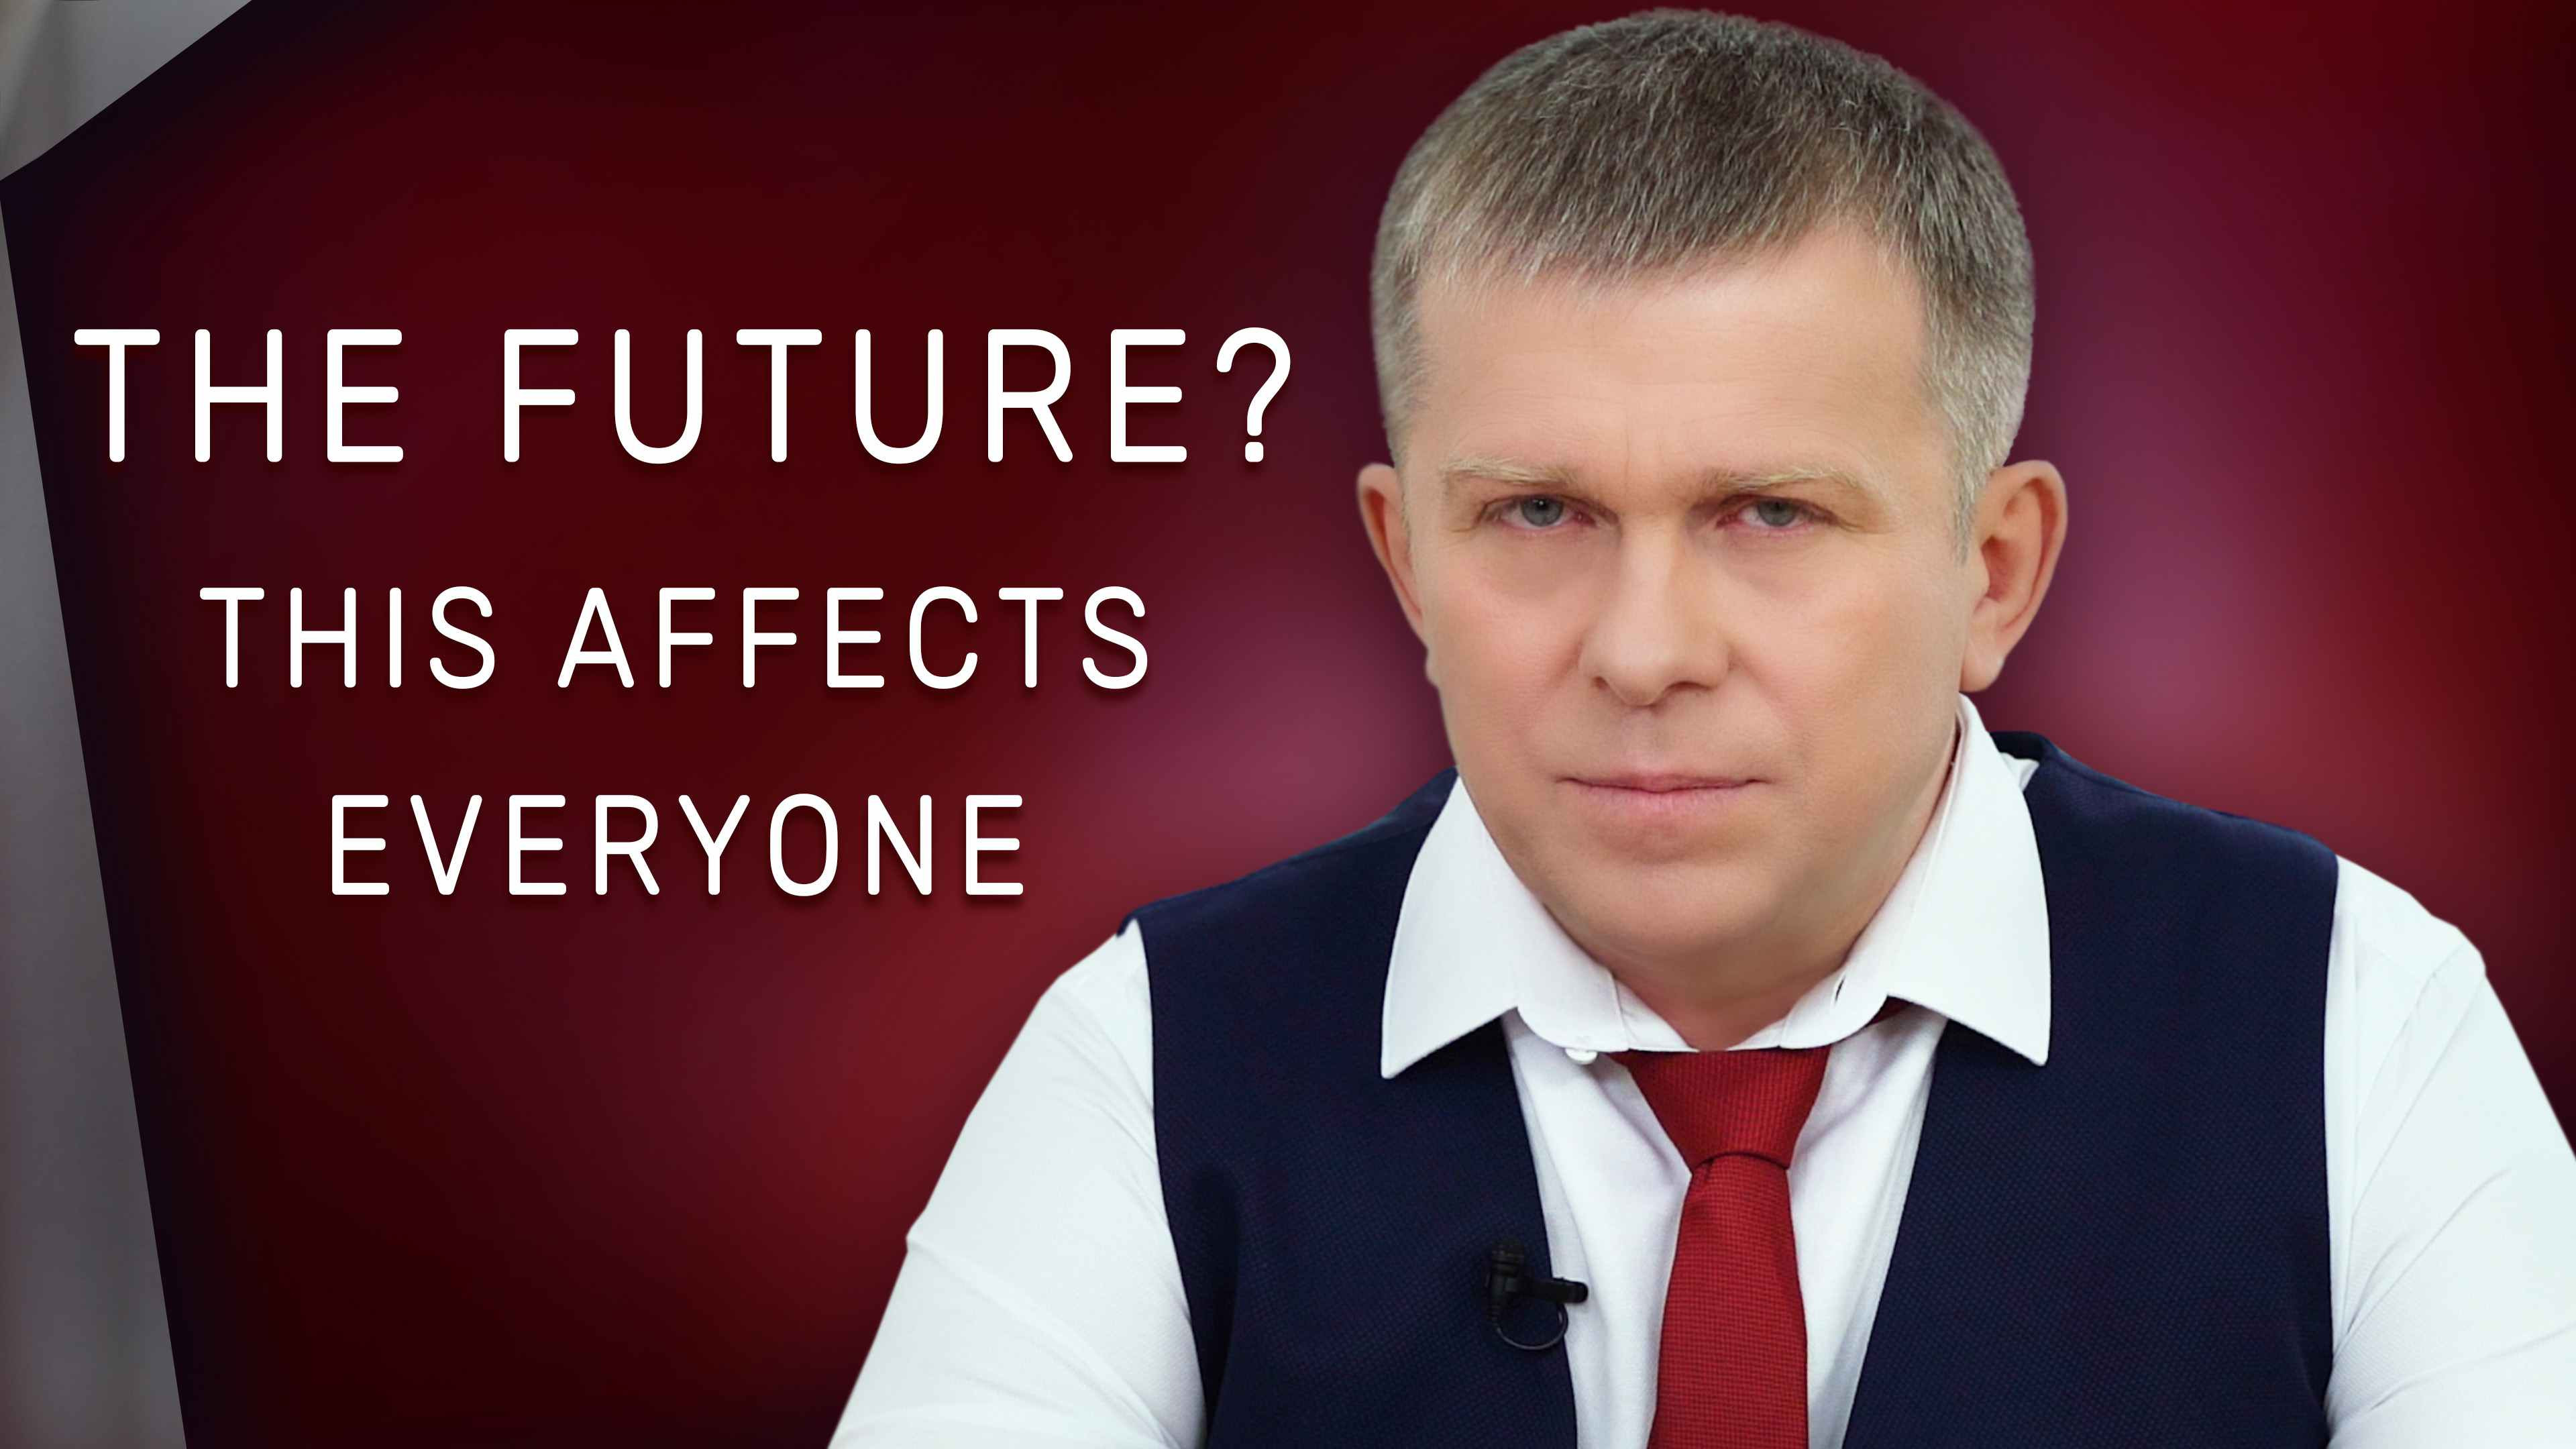 The Future? This Affects Everyone | NEW VIDEO